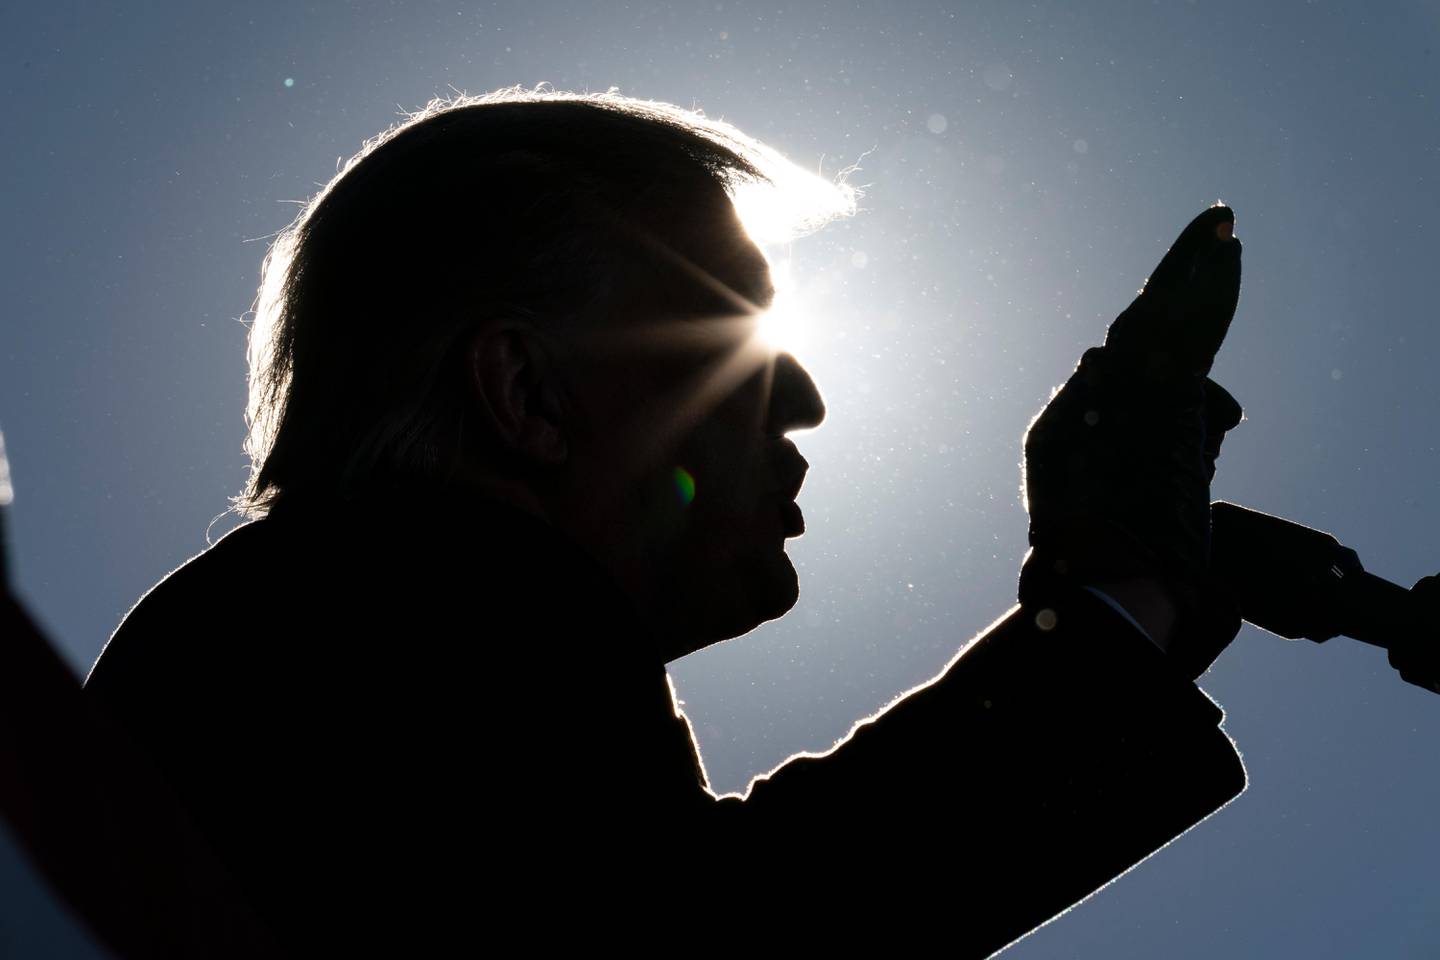 President Donald Trump speaks at a campaign rally at Green Bay Austin Straubel International Airport, Friday, Oct. 30, 2020, in Green Bay, Wis. (AP Photo/Alex Brandon)